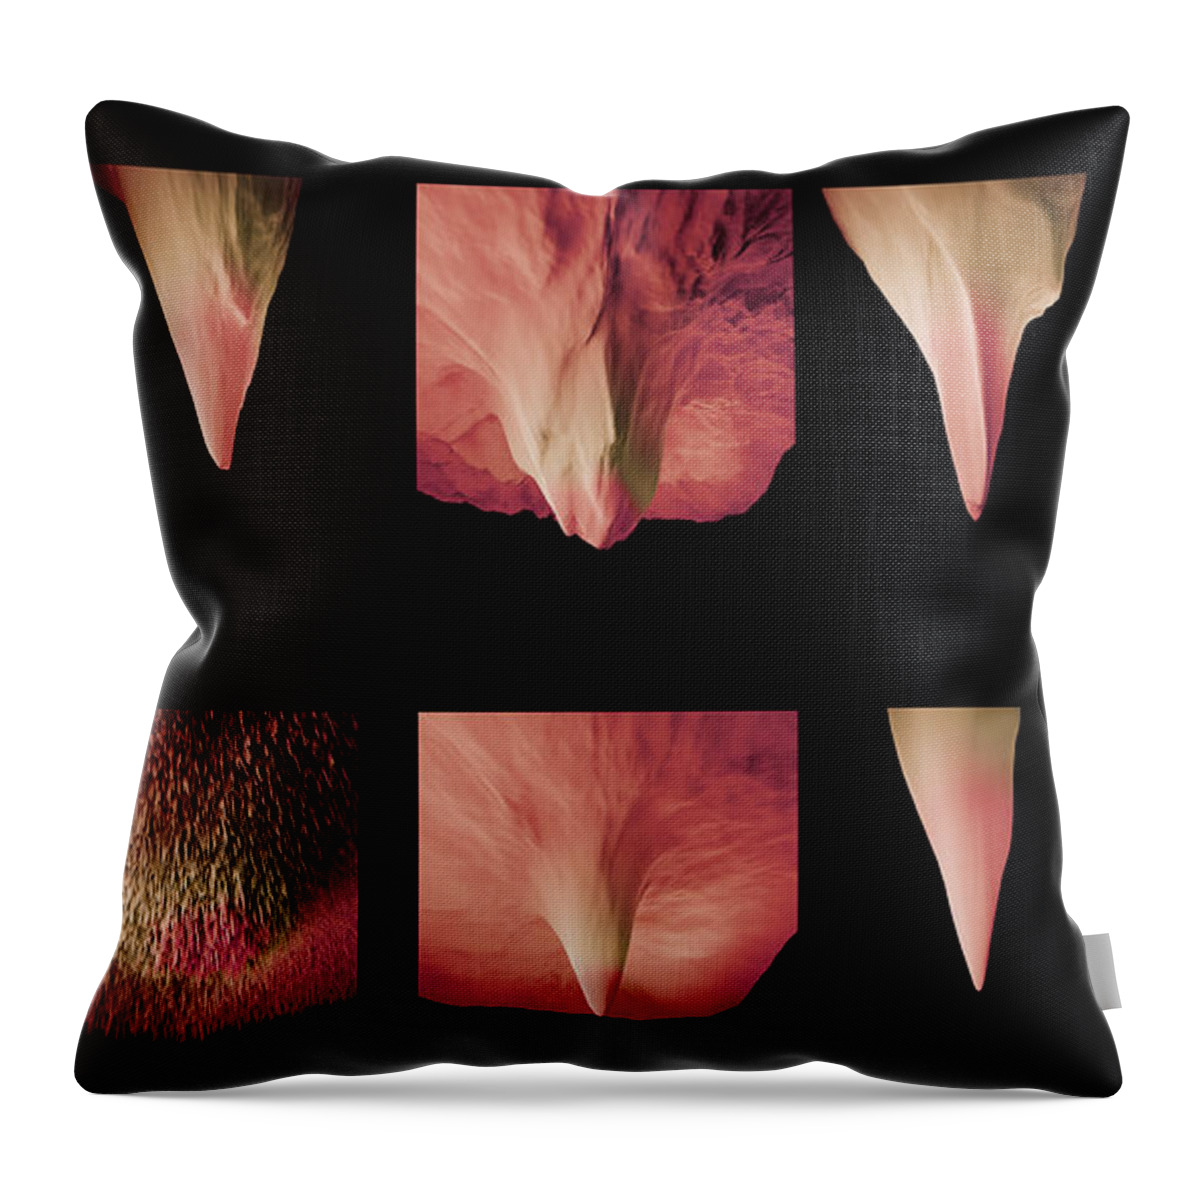 Artificial Intelligence Throw Pillow featuring the digital art Convex Parade by Javier Ideami